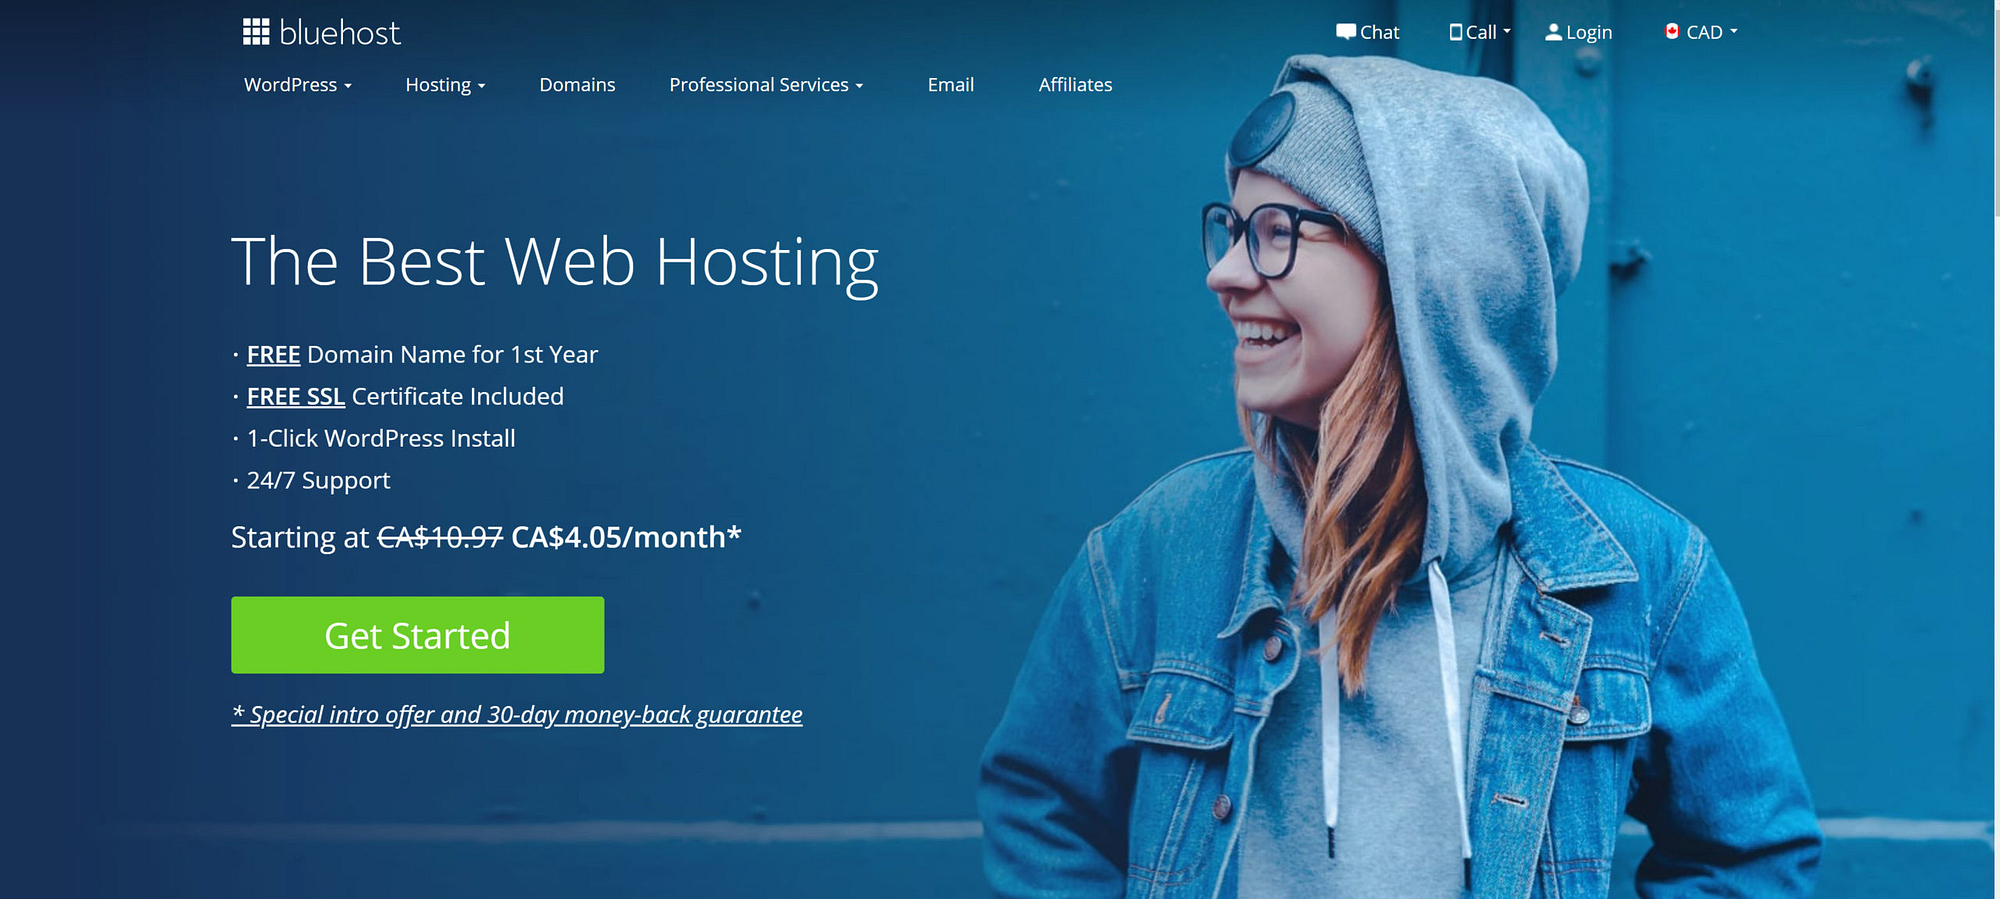 Bluehost use a person's face, one of many web design ideas, for their homepage